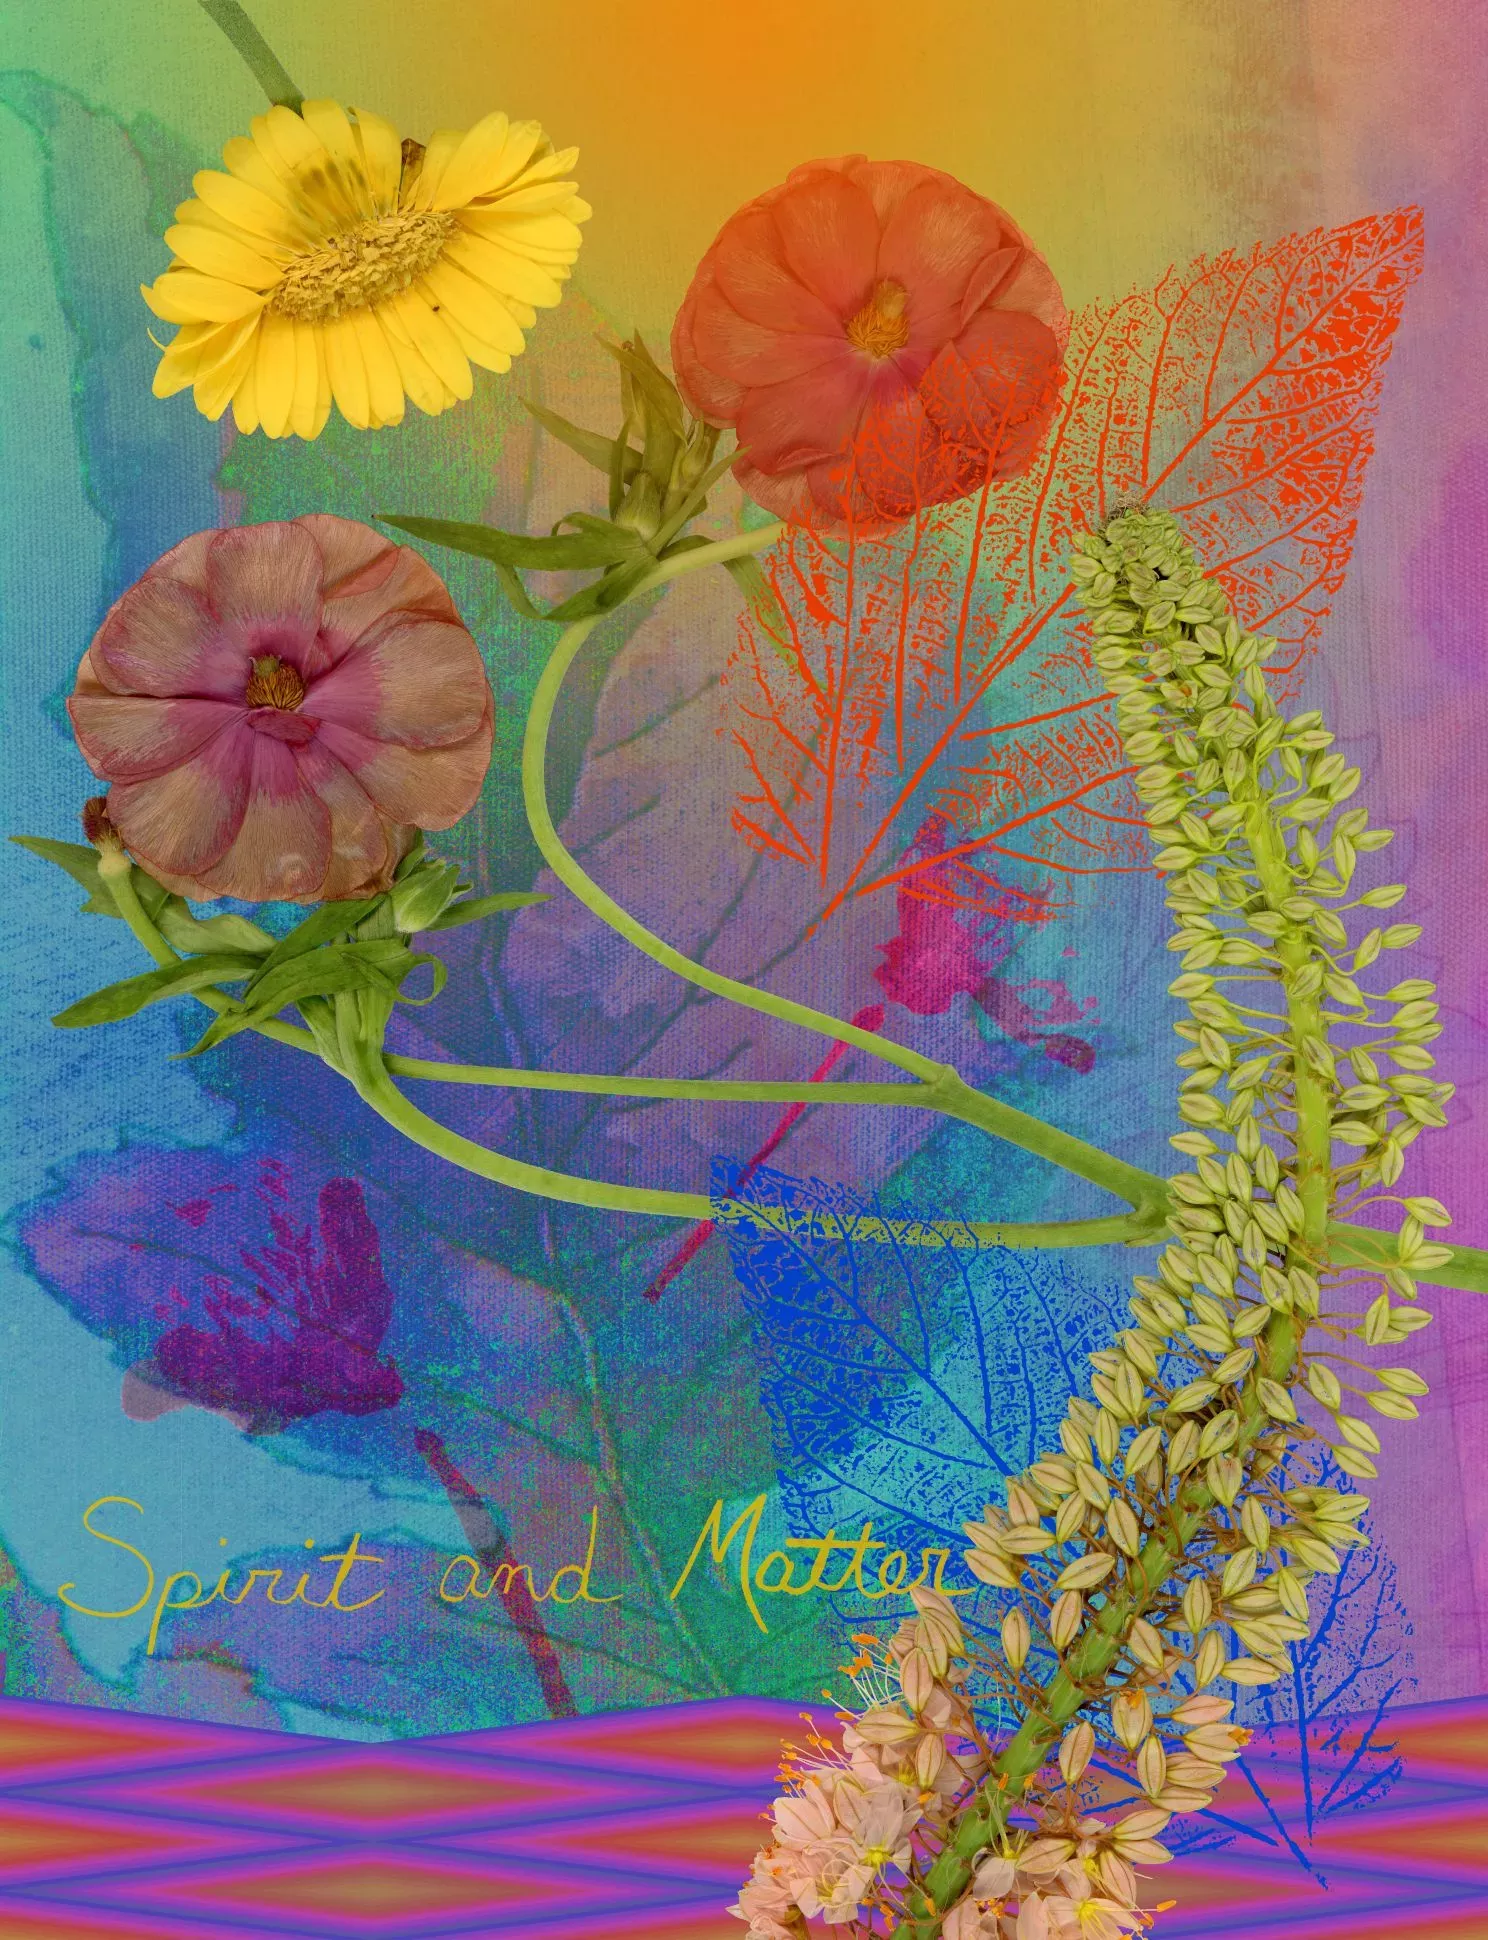 A collection of flowers, on a vibrant background of different colours